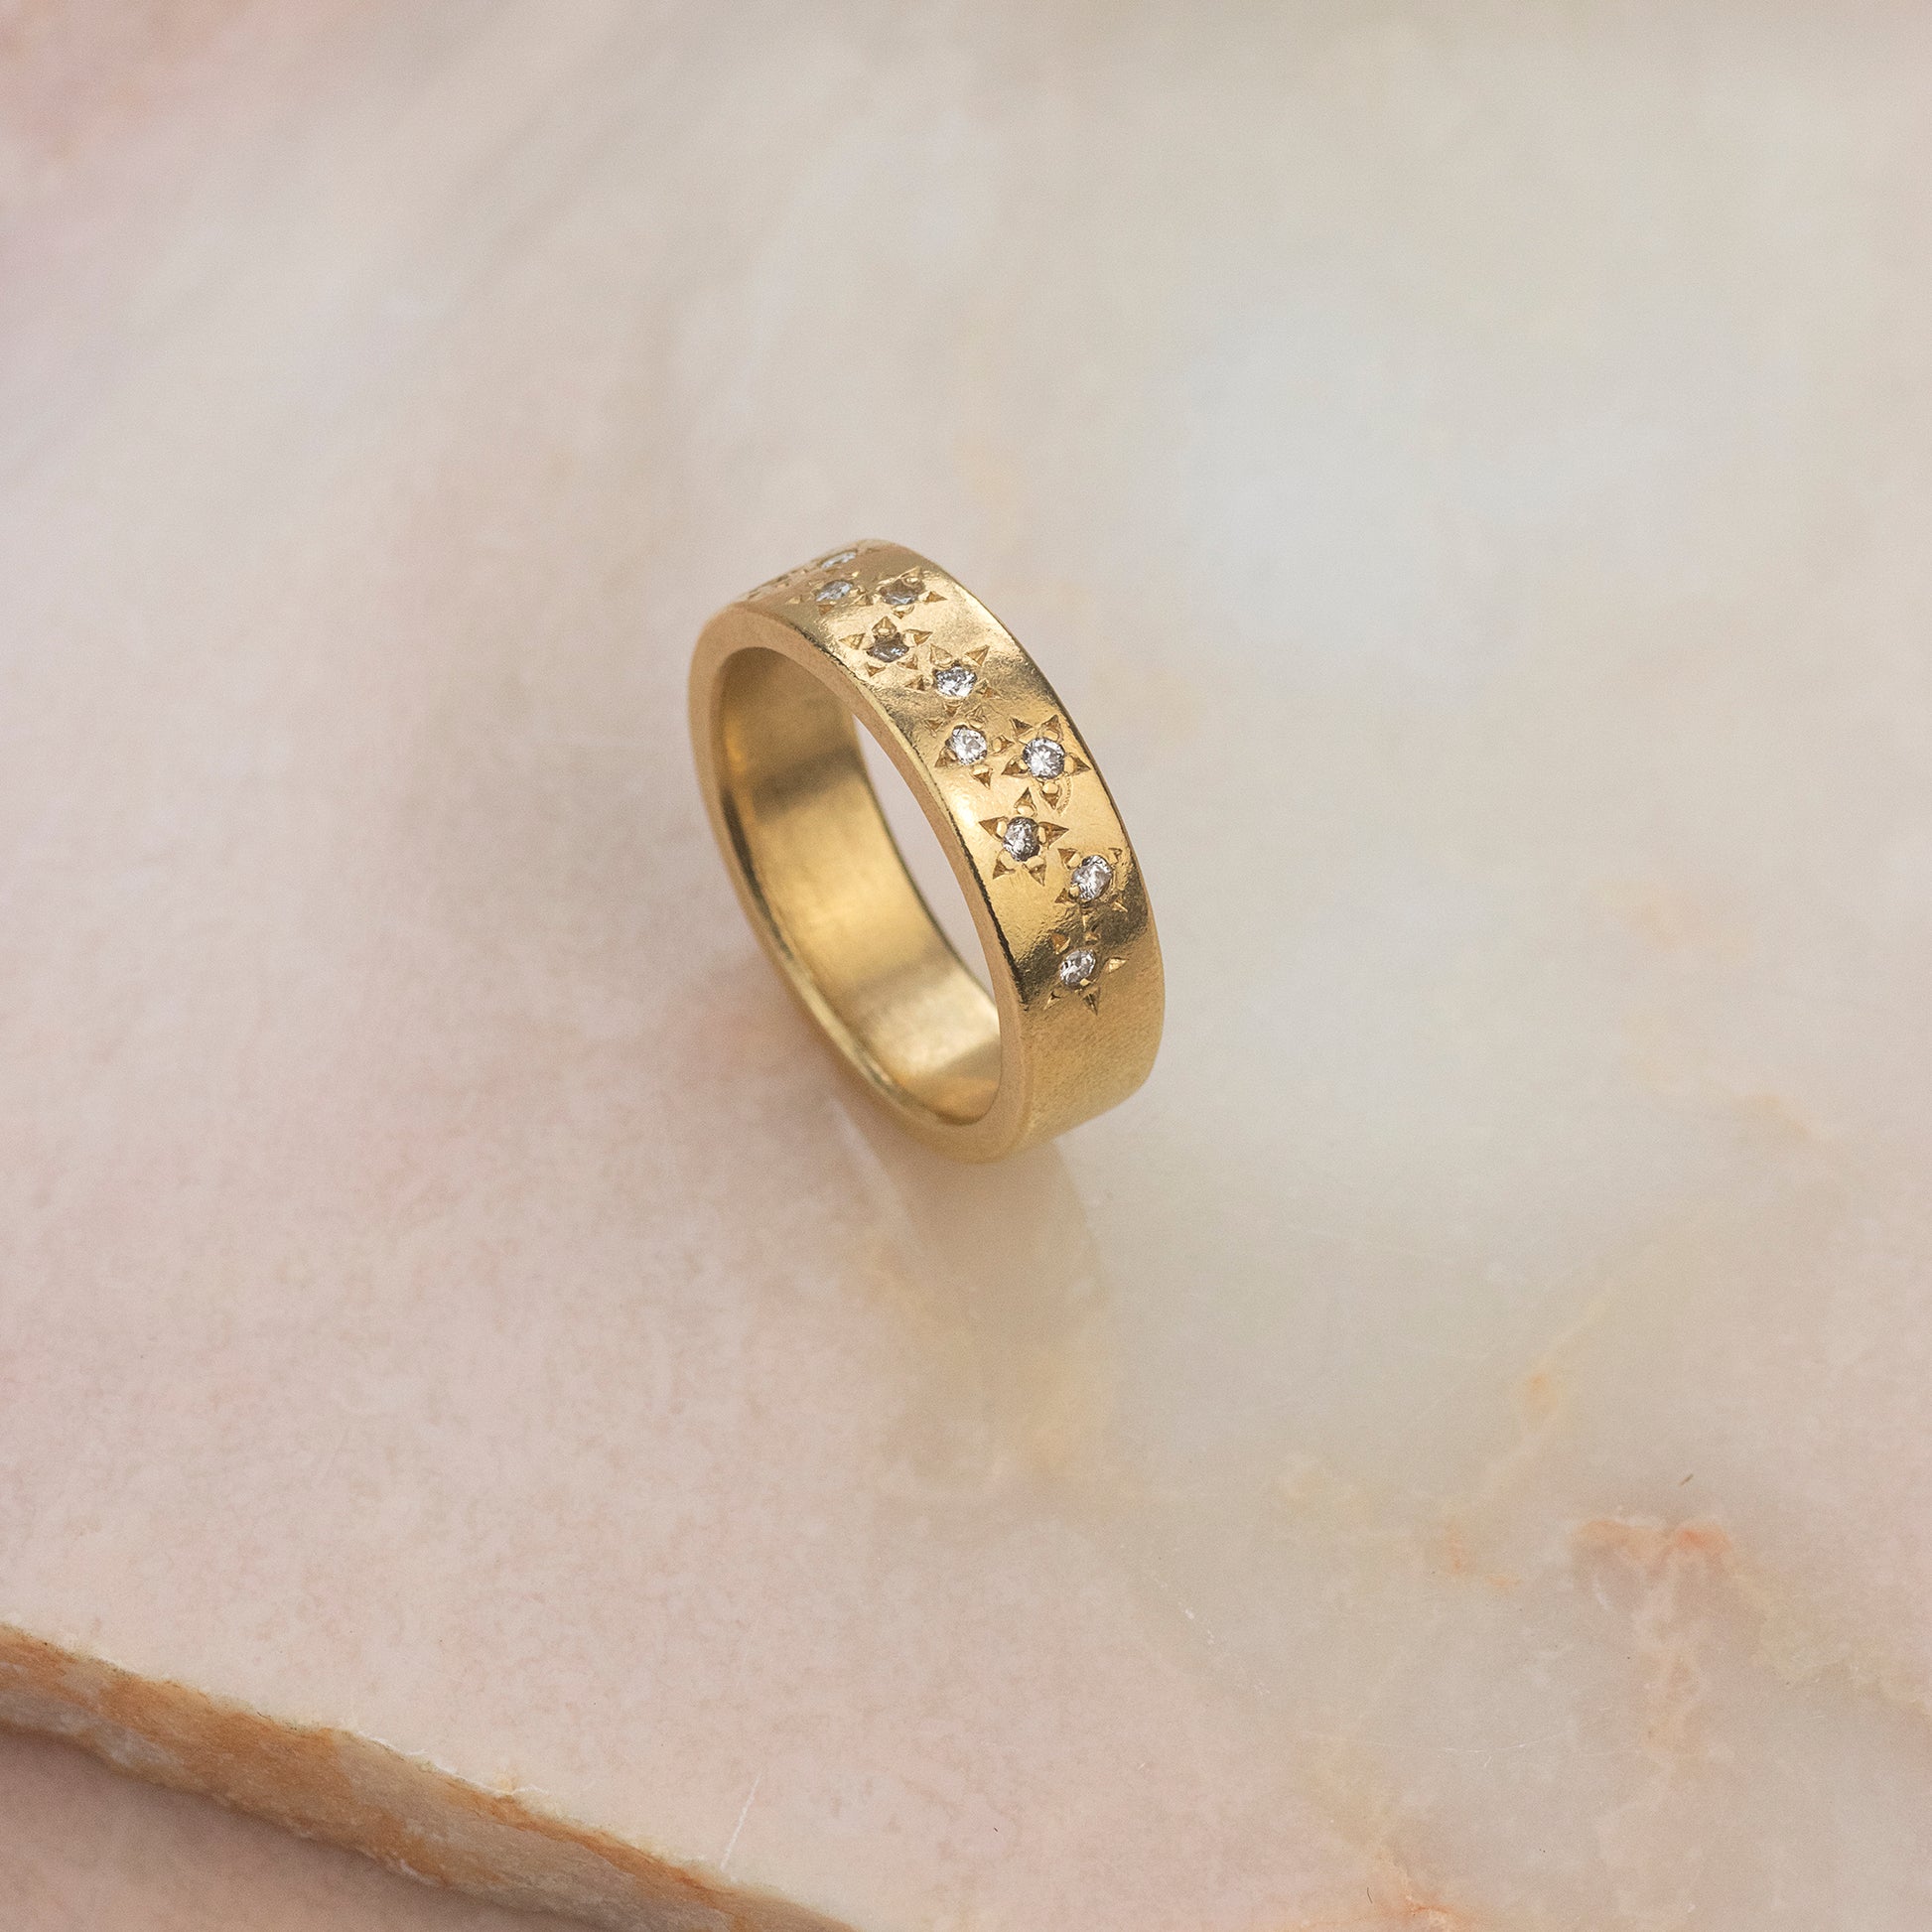 Gold Plated Starry Skies Ring - 13 Diamonds